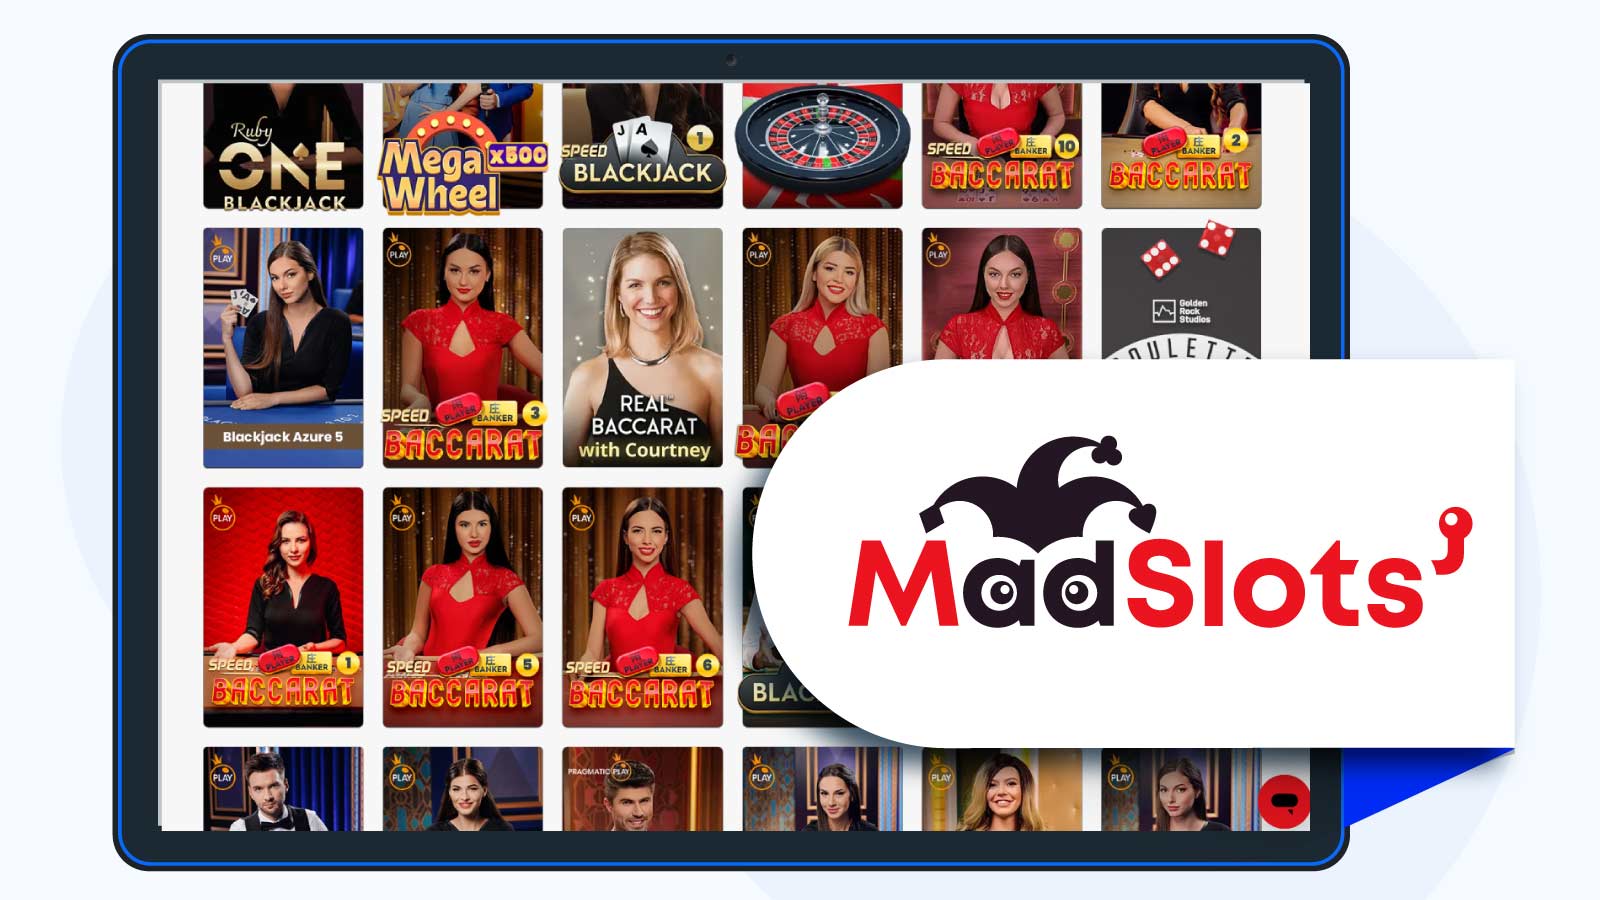 Madslots – our runner-up baccarat casino